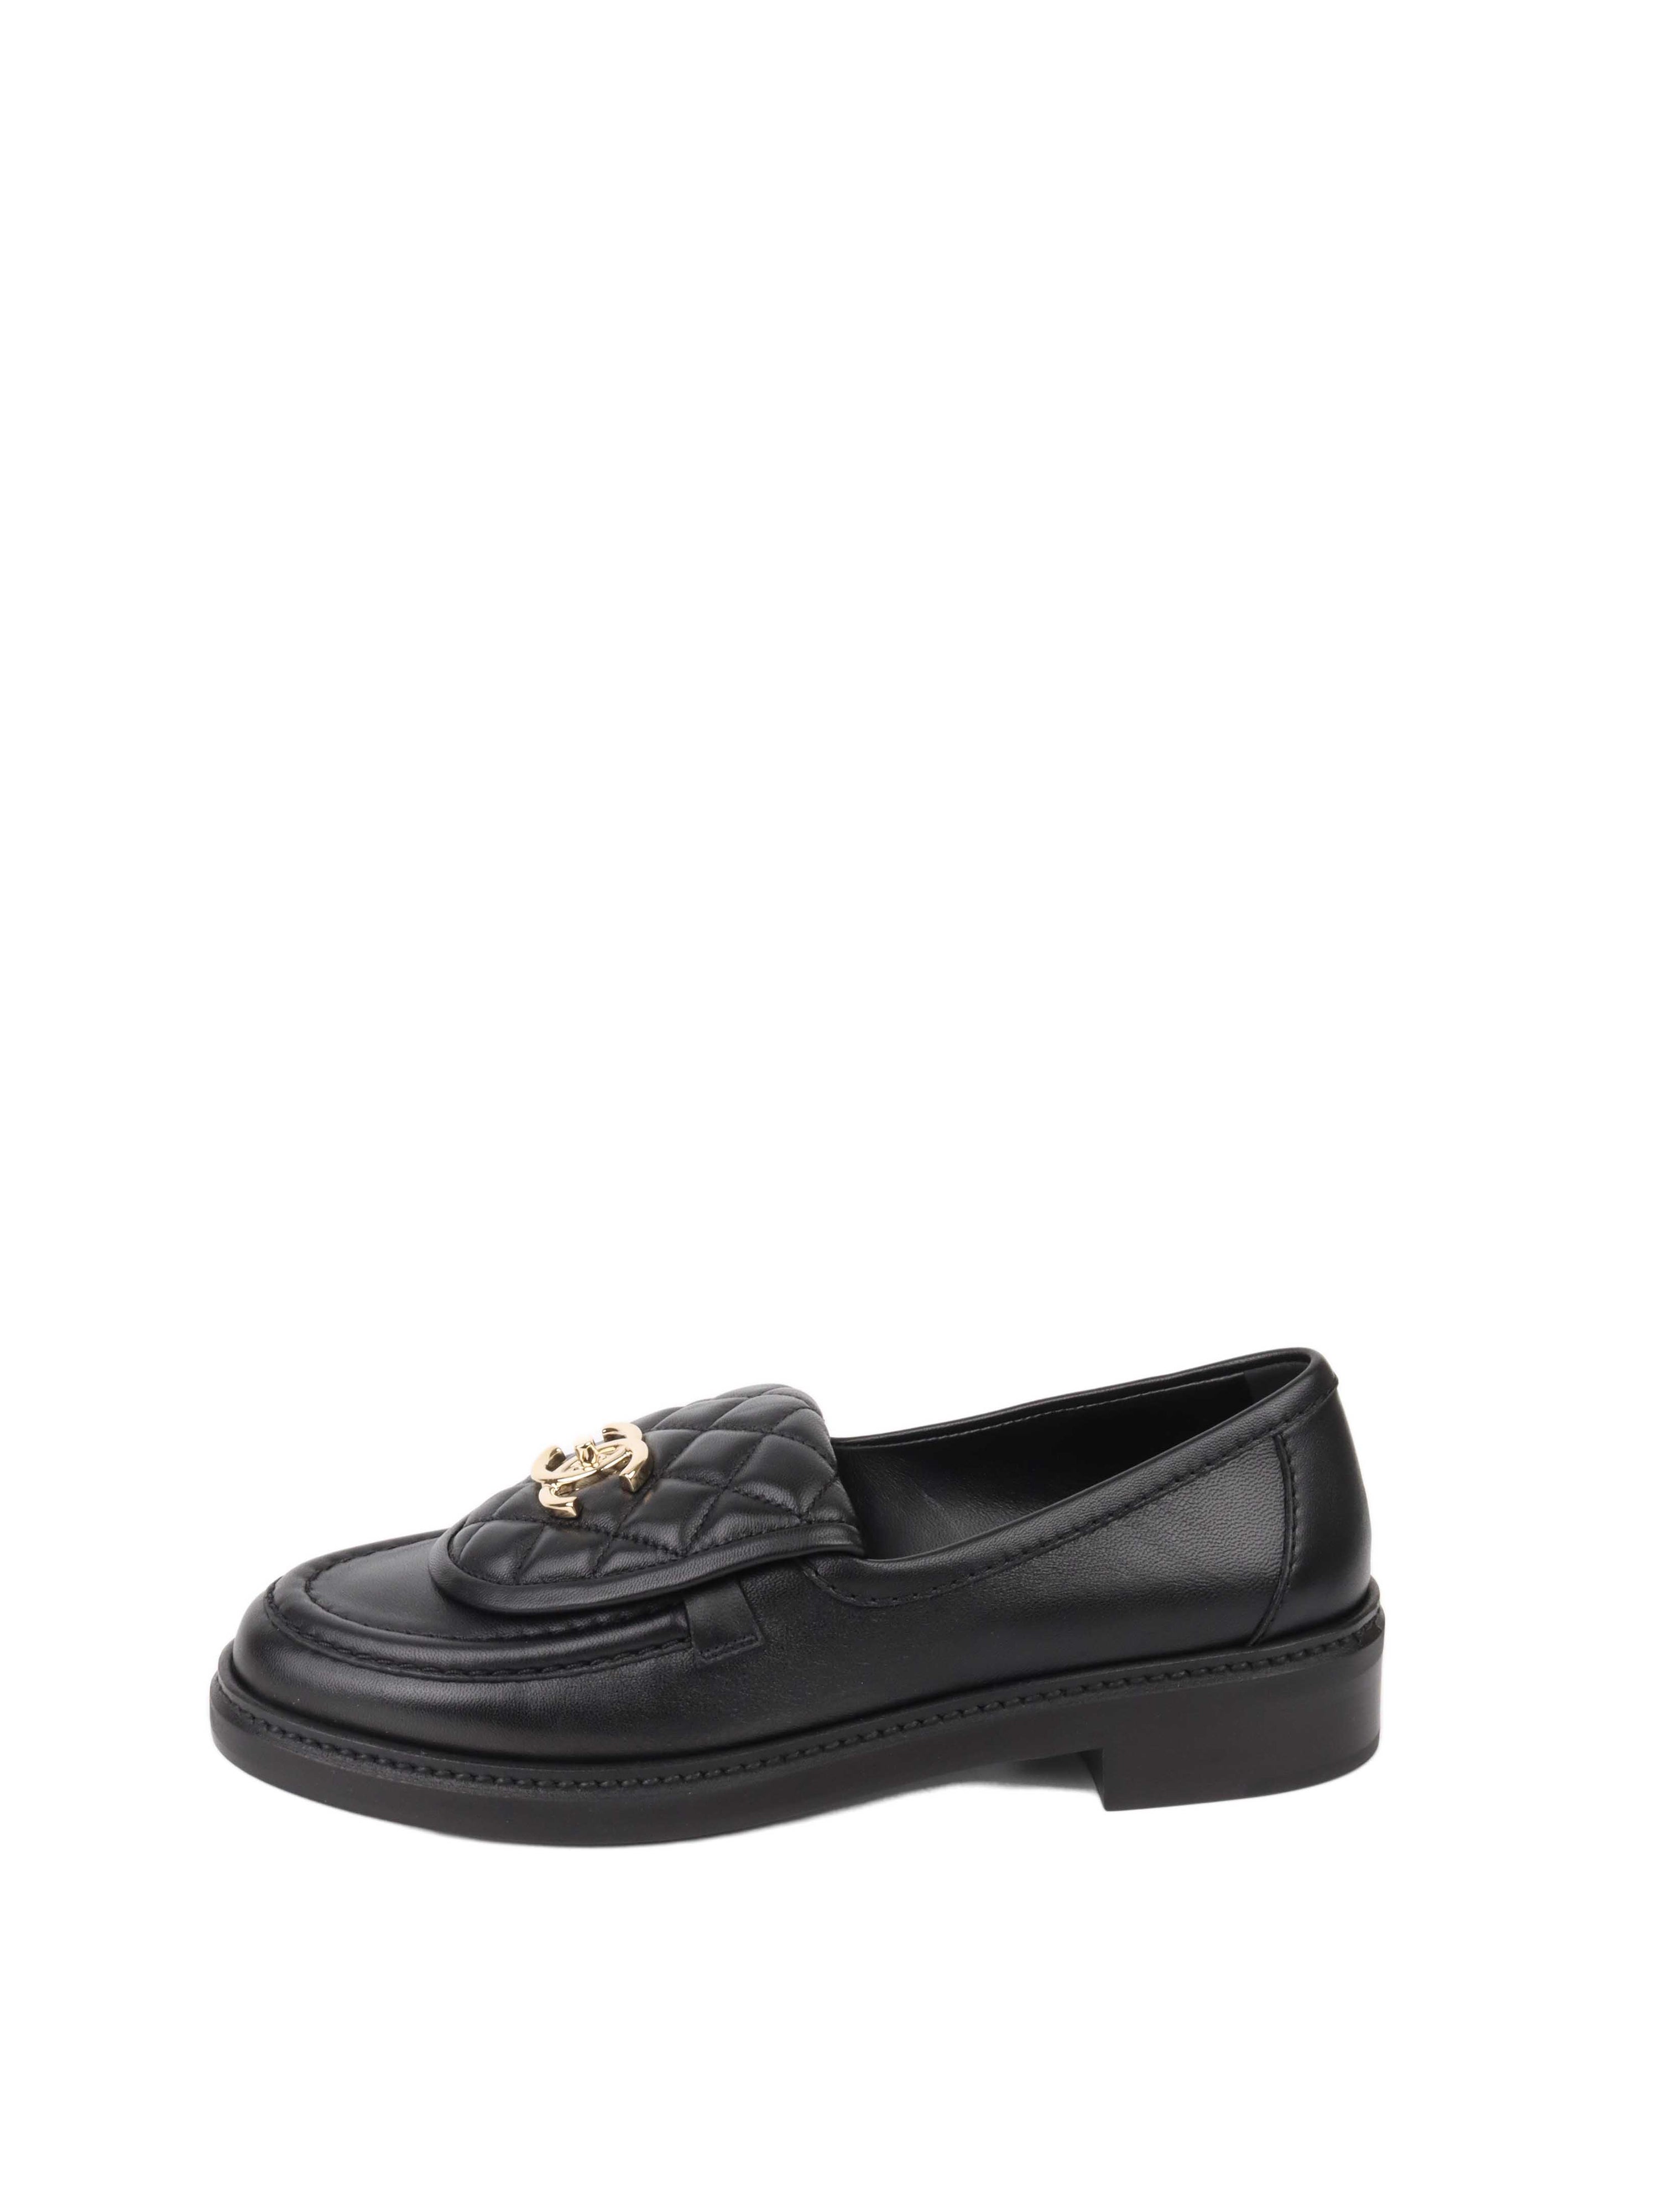 Chanel Quilted Black Loafers Size 36.5